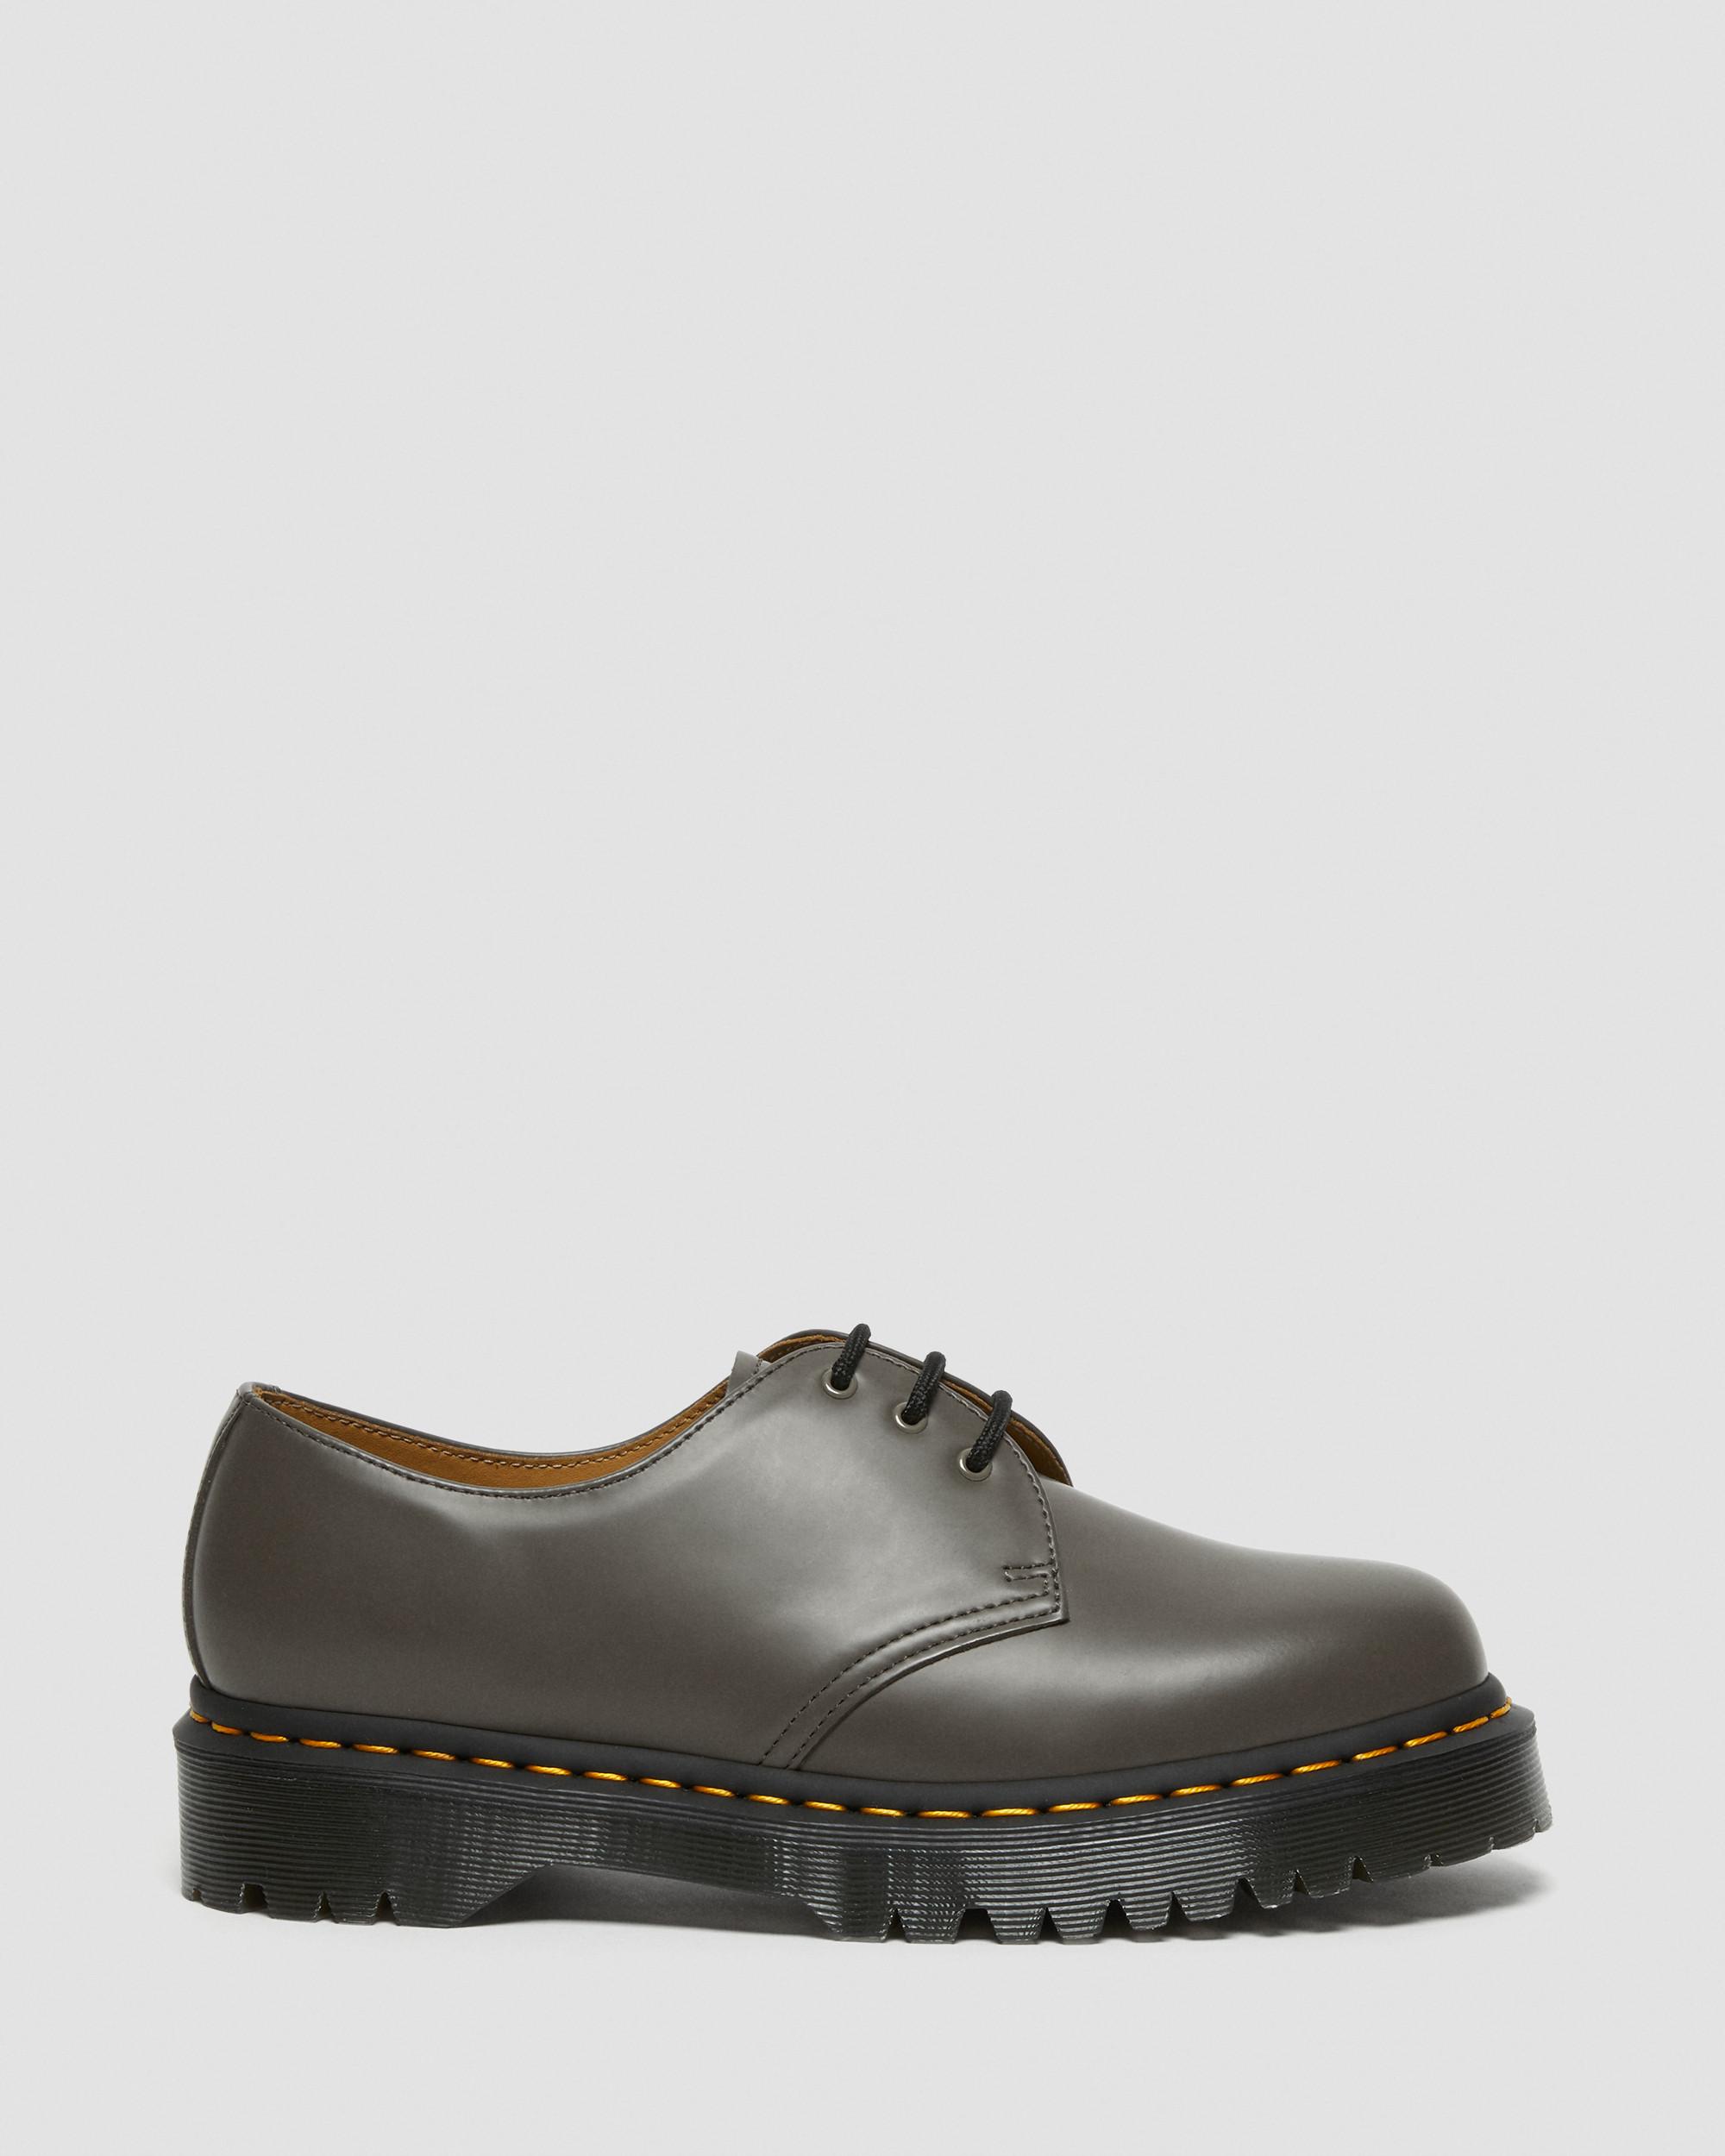 1461 Bex Smooth Leather Oxford Shoes in Khaki Grey | Dr. Martens